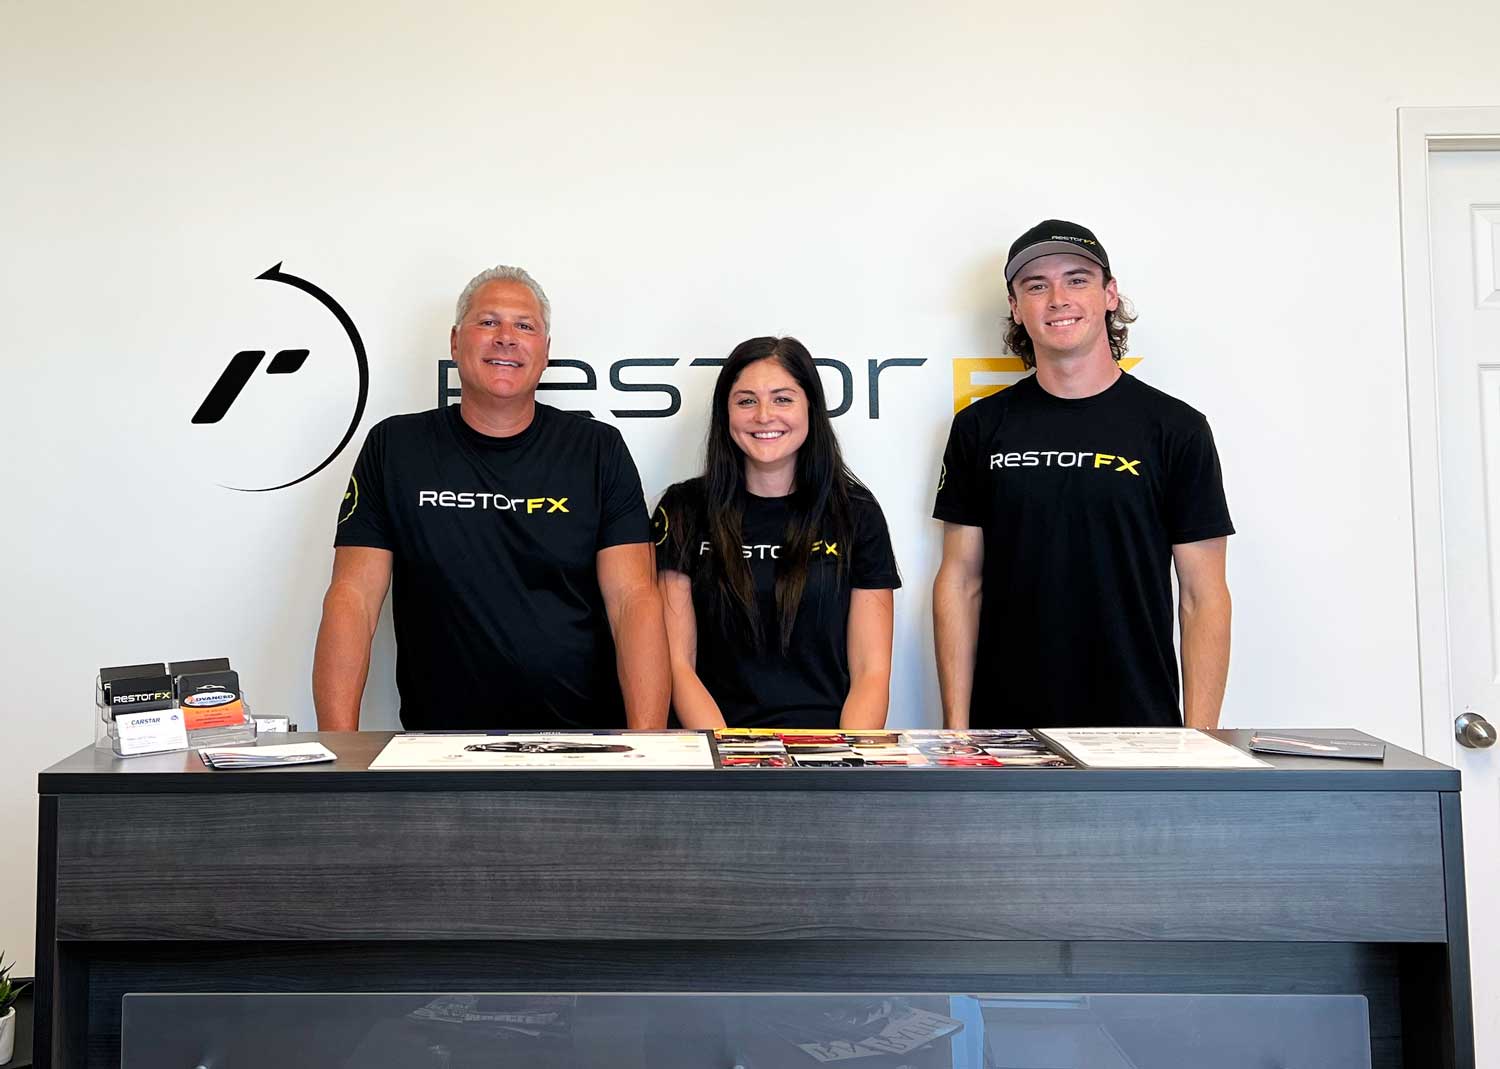 RestorFX Windsor team standing proudly in front of logo on branded white wall in the lobby area